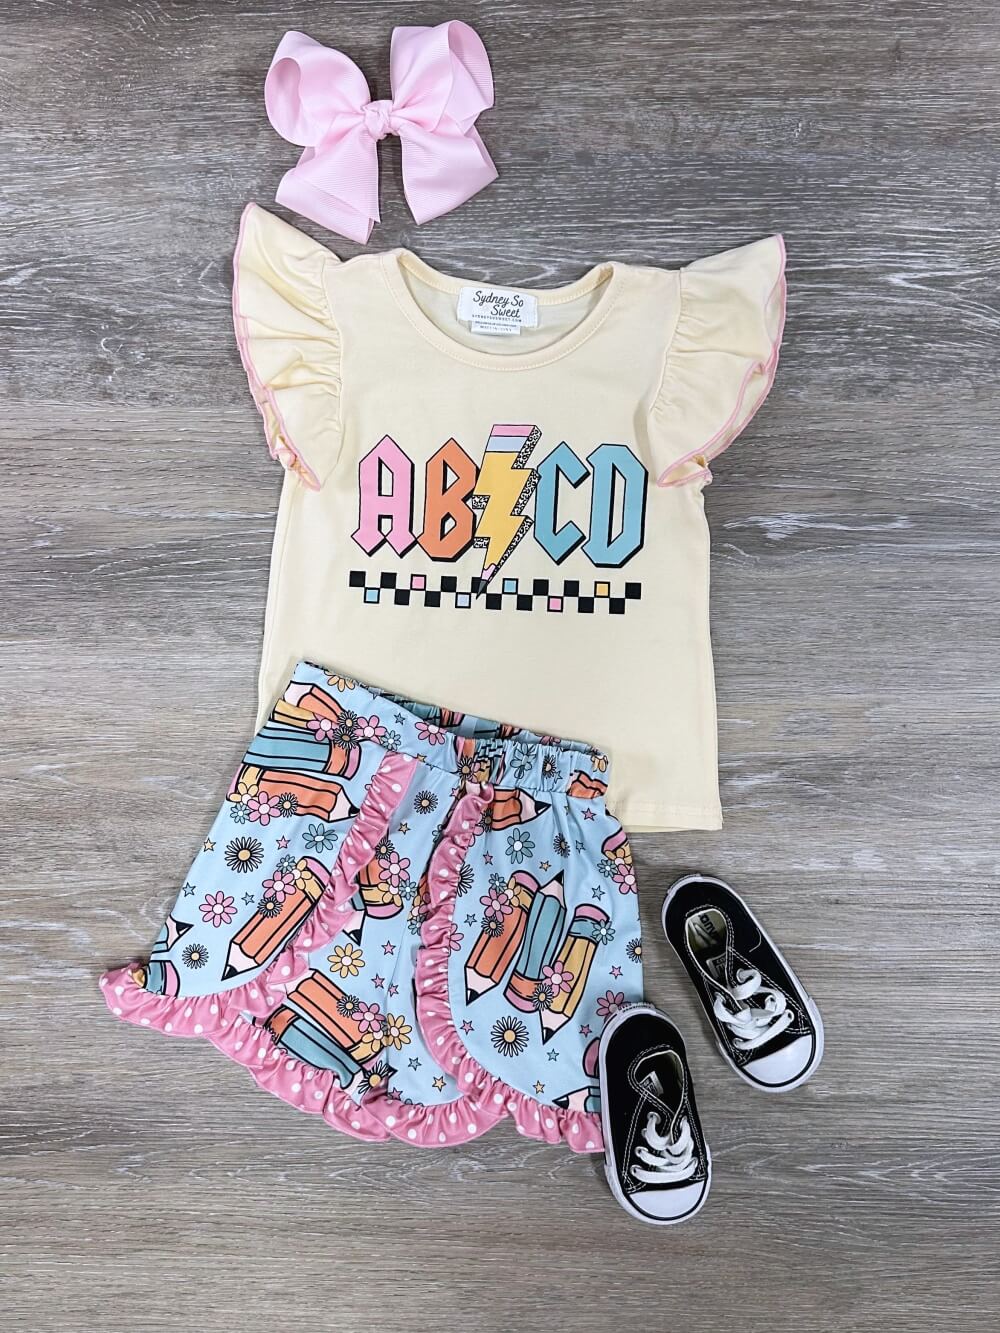 ABCD Rocker Girl Back to School Shorts Outfit